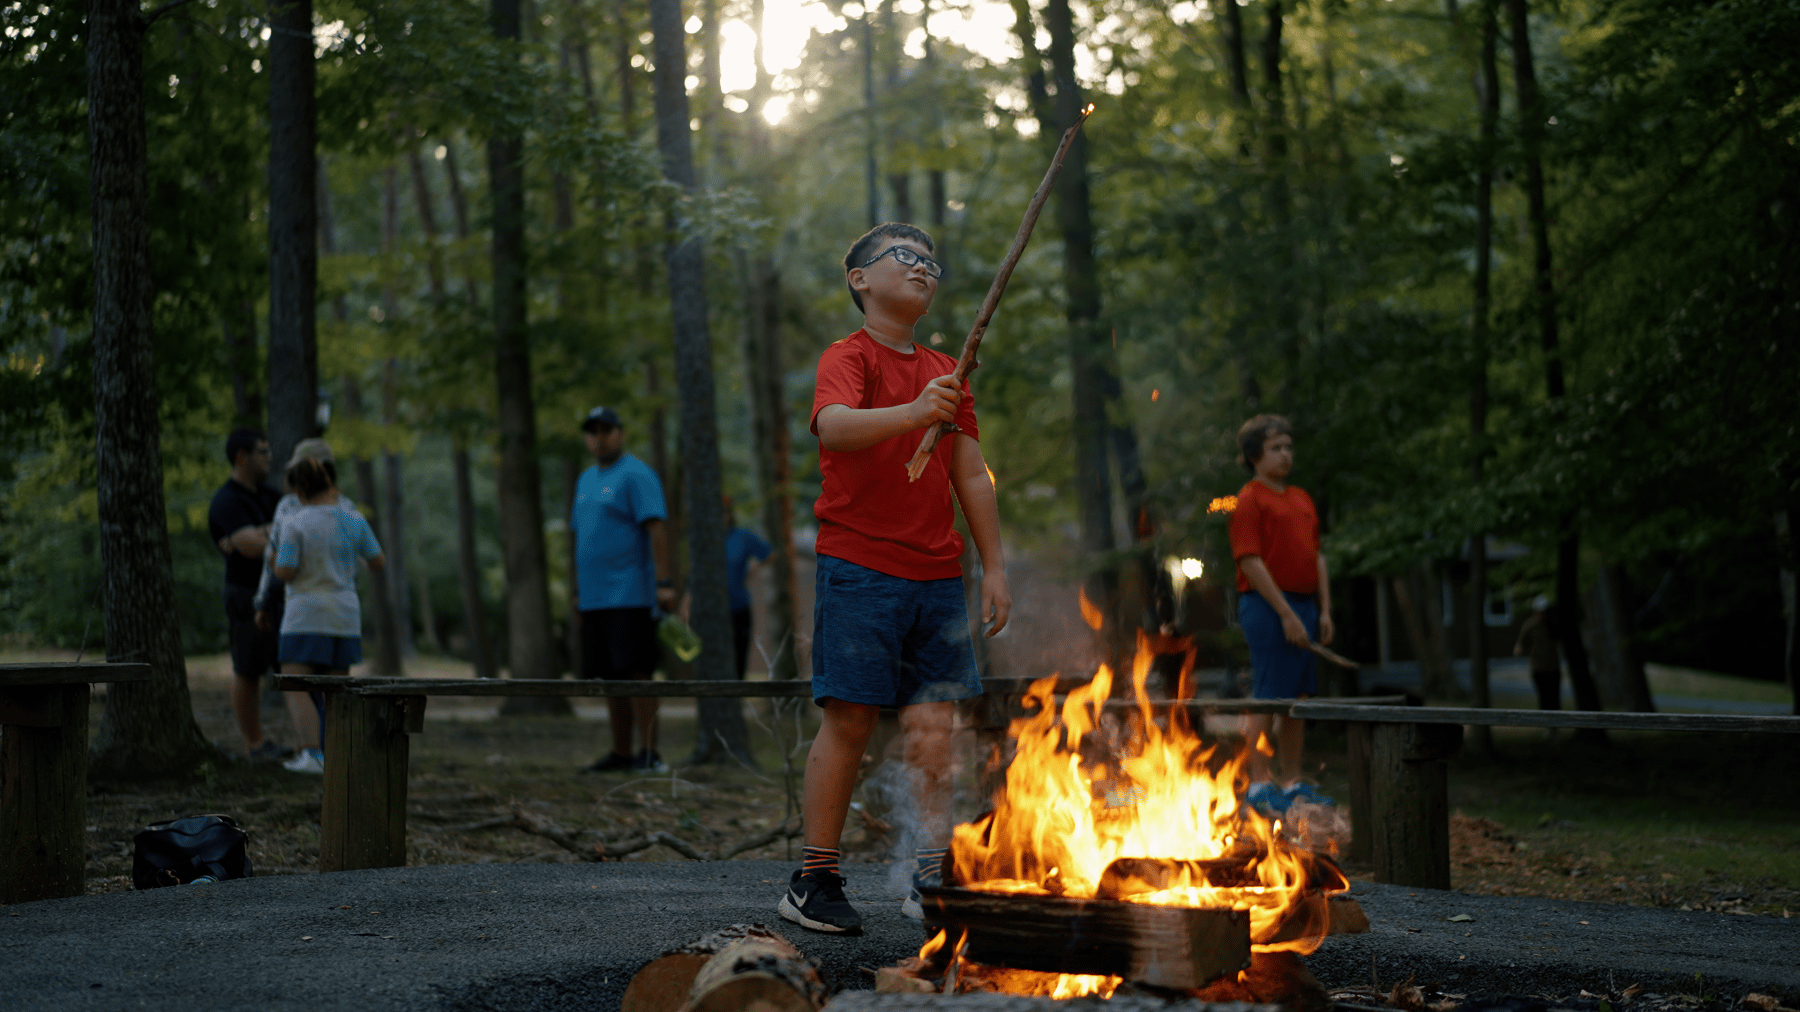 Boy playing with stick at camp fire